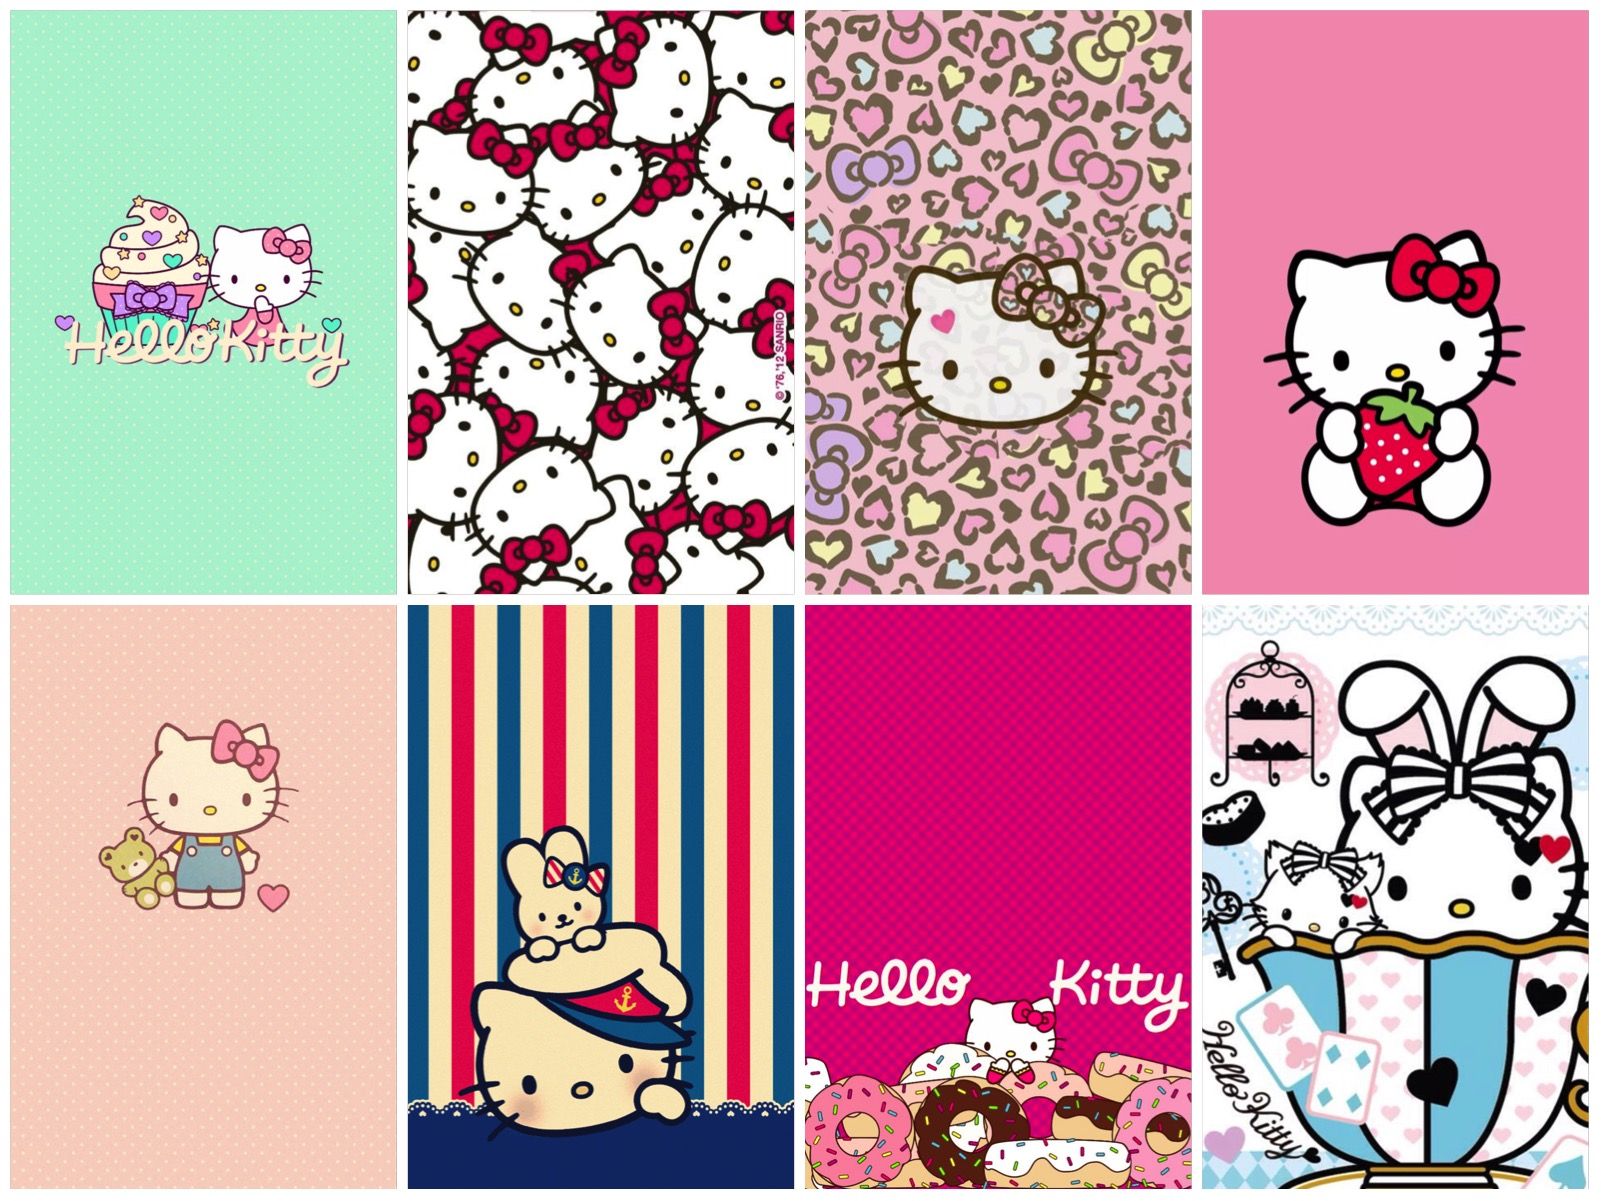 Cute Hello Kitty Wallpapers for Mobile - Cute Wallpapers